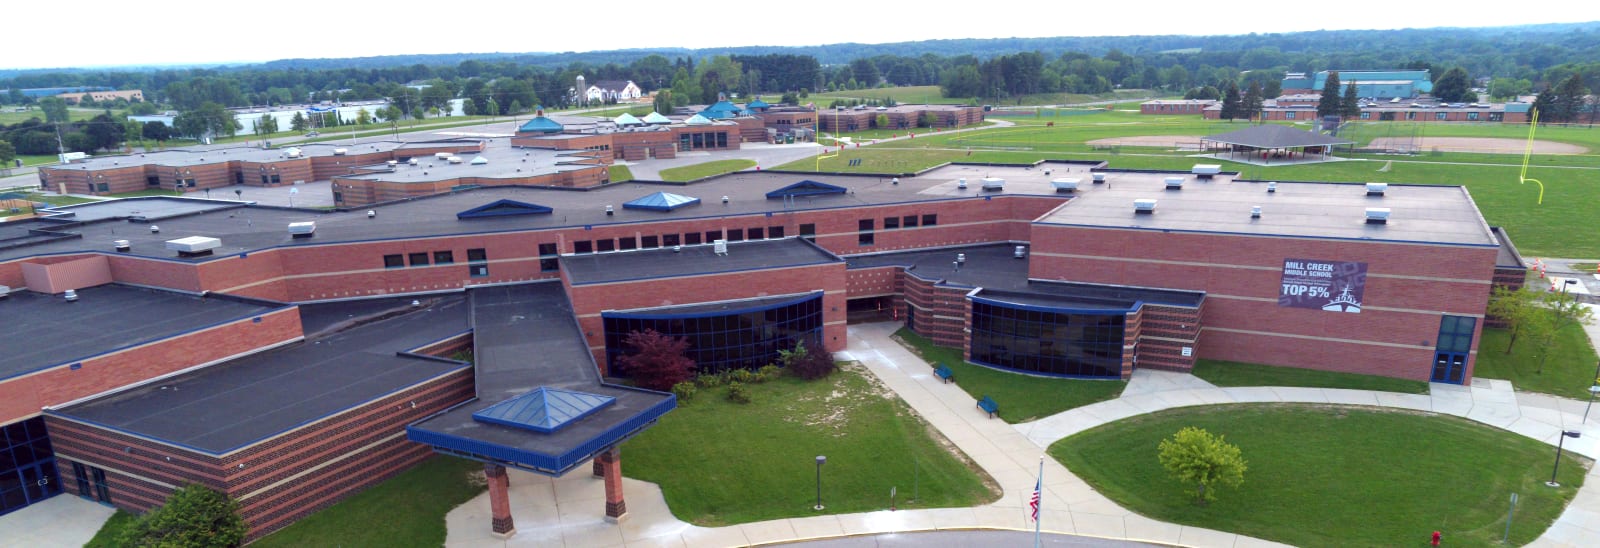 Home - Forest Creek Middle School